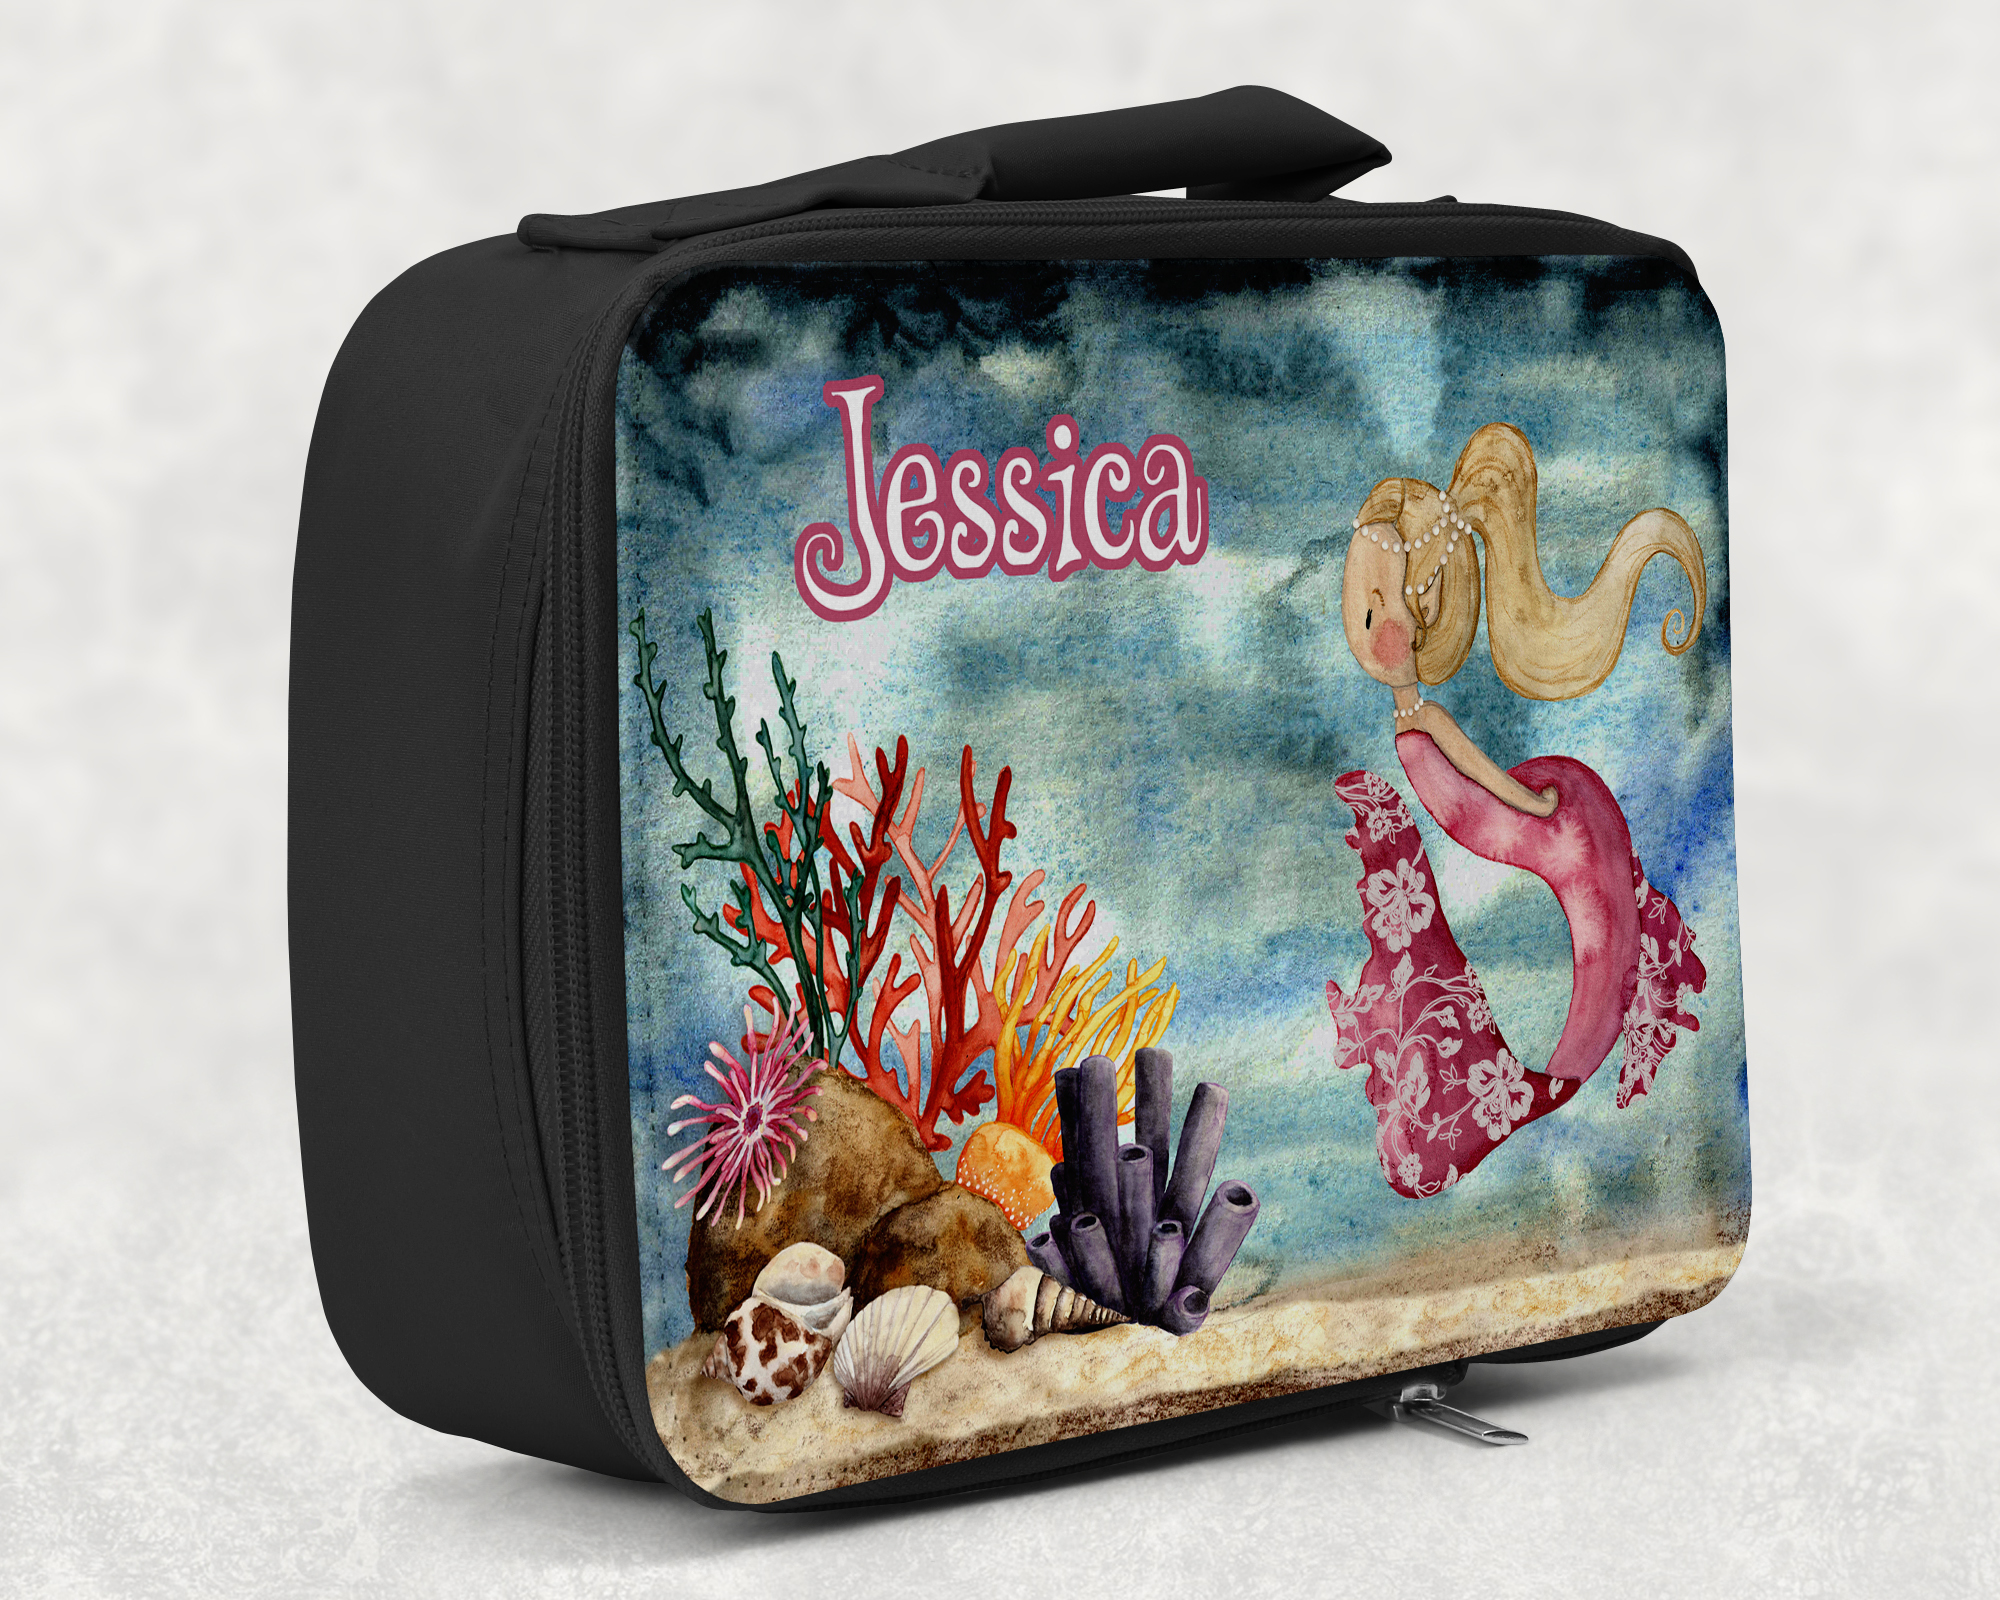 children's insulated lunch bag with bright colourful personalised printed design in under the sea mermaid theme